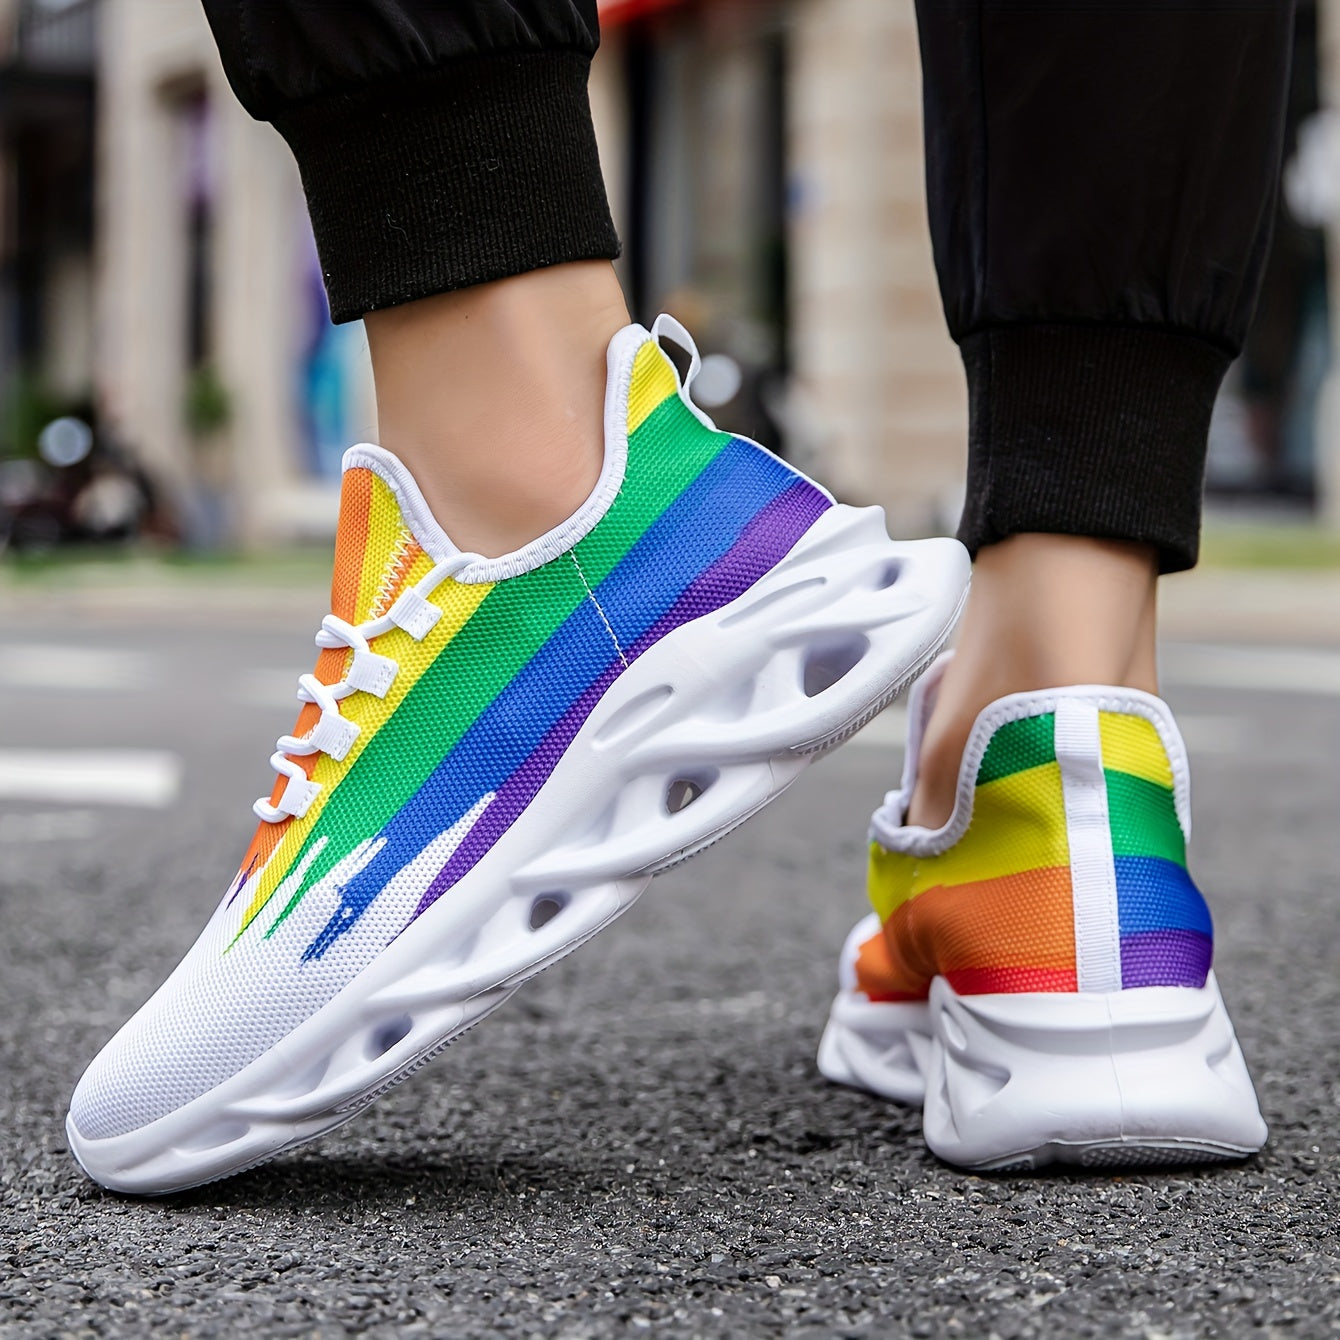 Slip-on Blade Sneakers, Rainbow Color Athletic Shoes